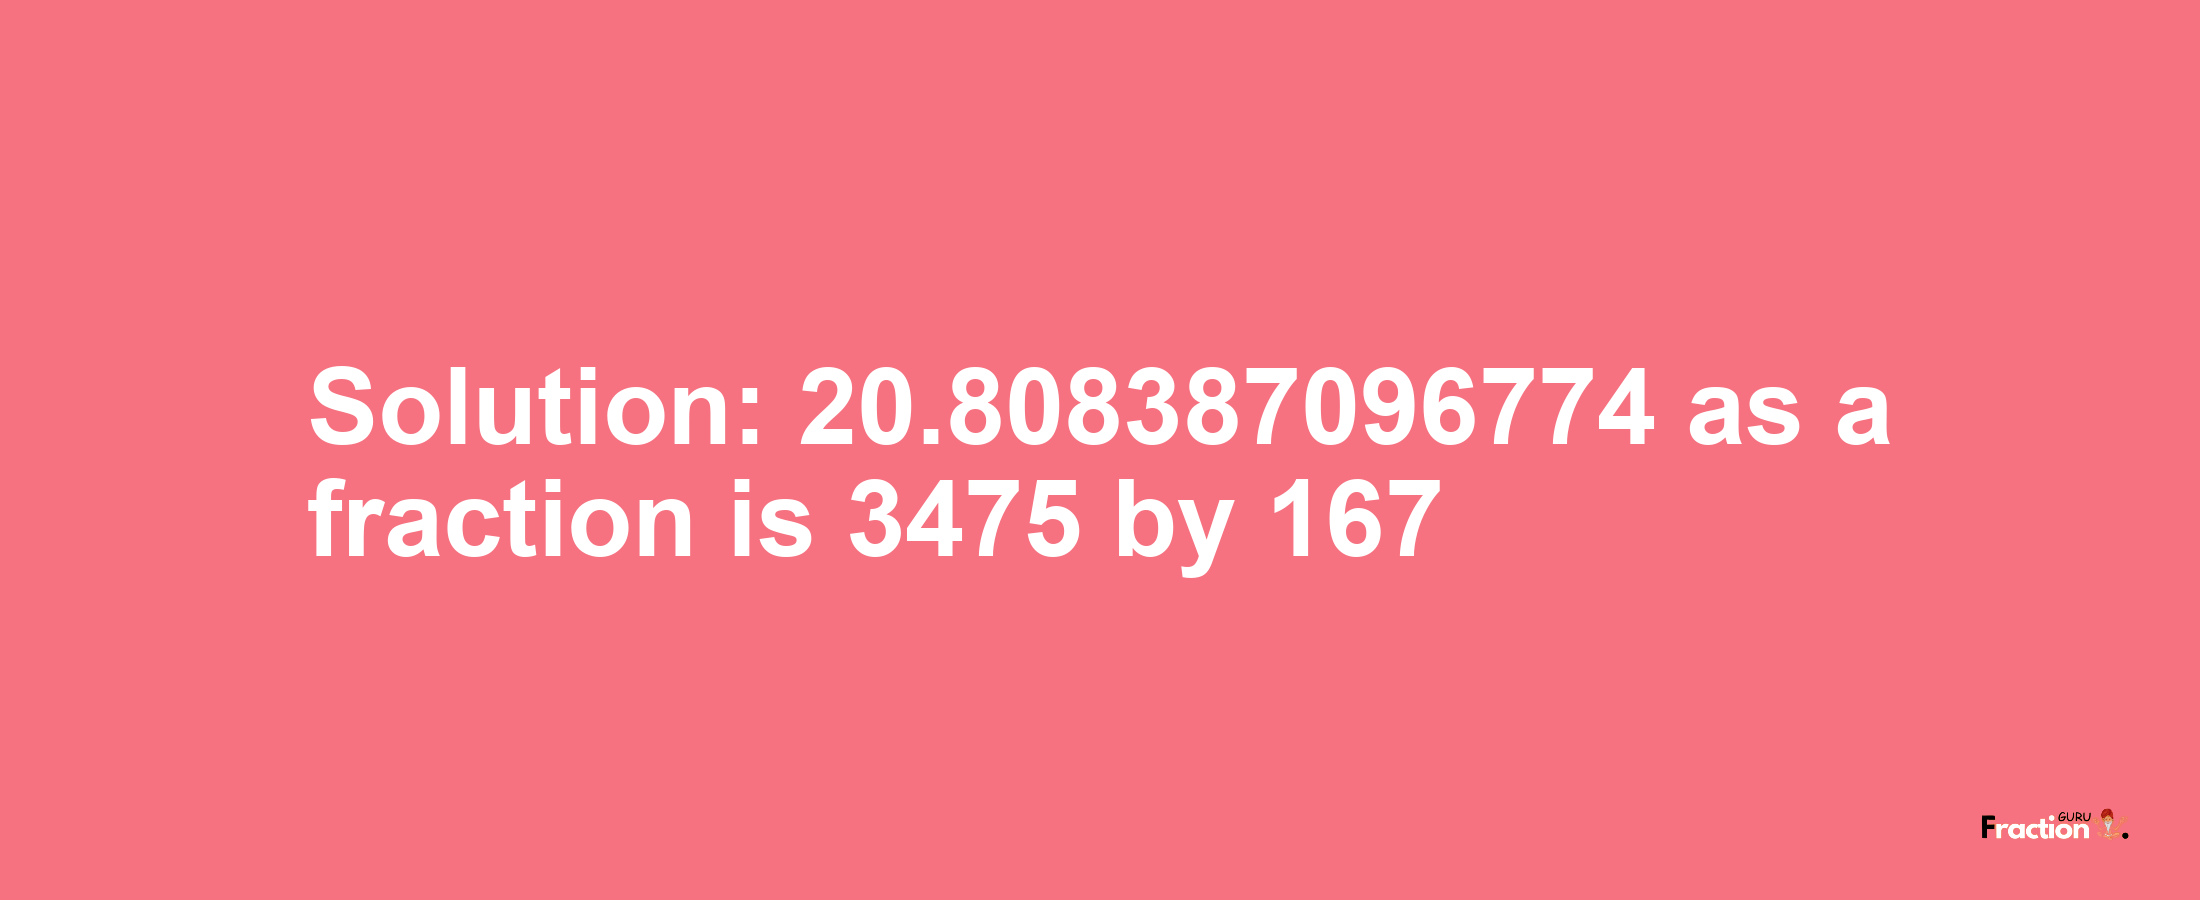 Solution:20.808387096774 as a fraction is 3475/167